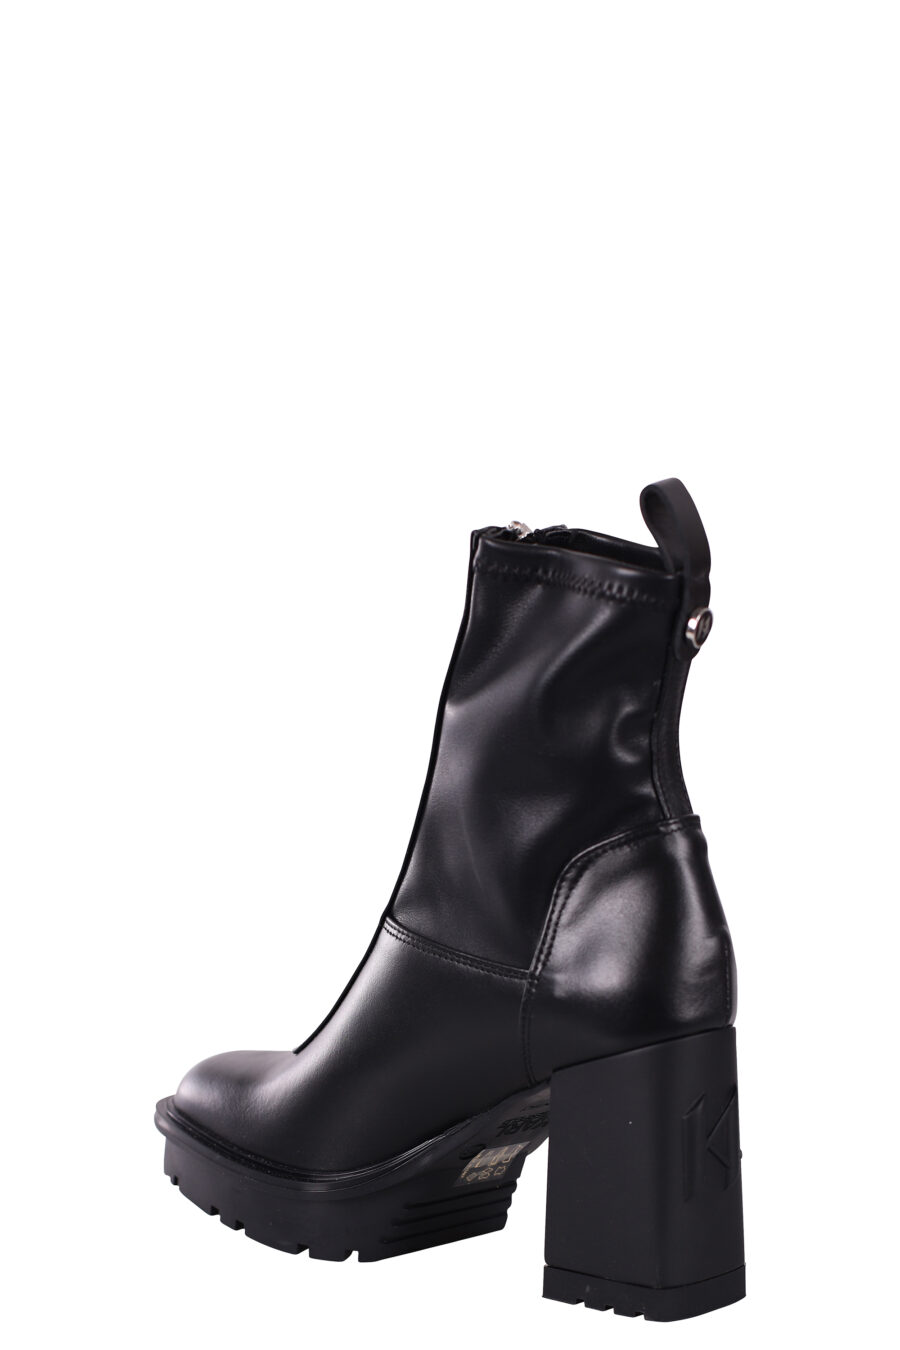 Black sock ankle boots with heel and platform - IMG 5812